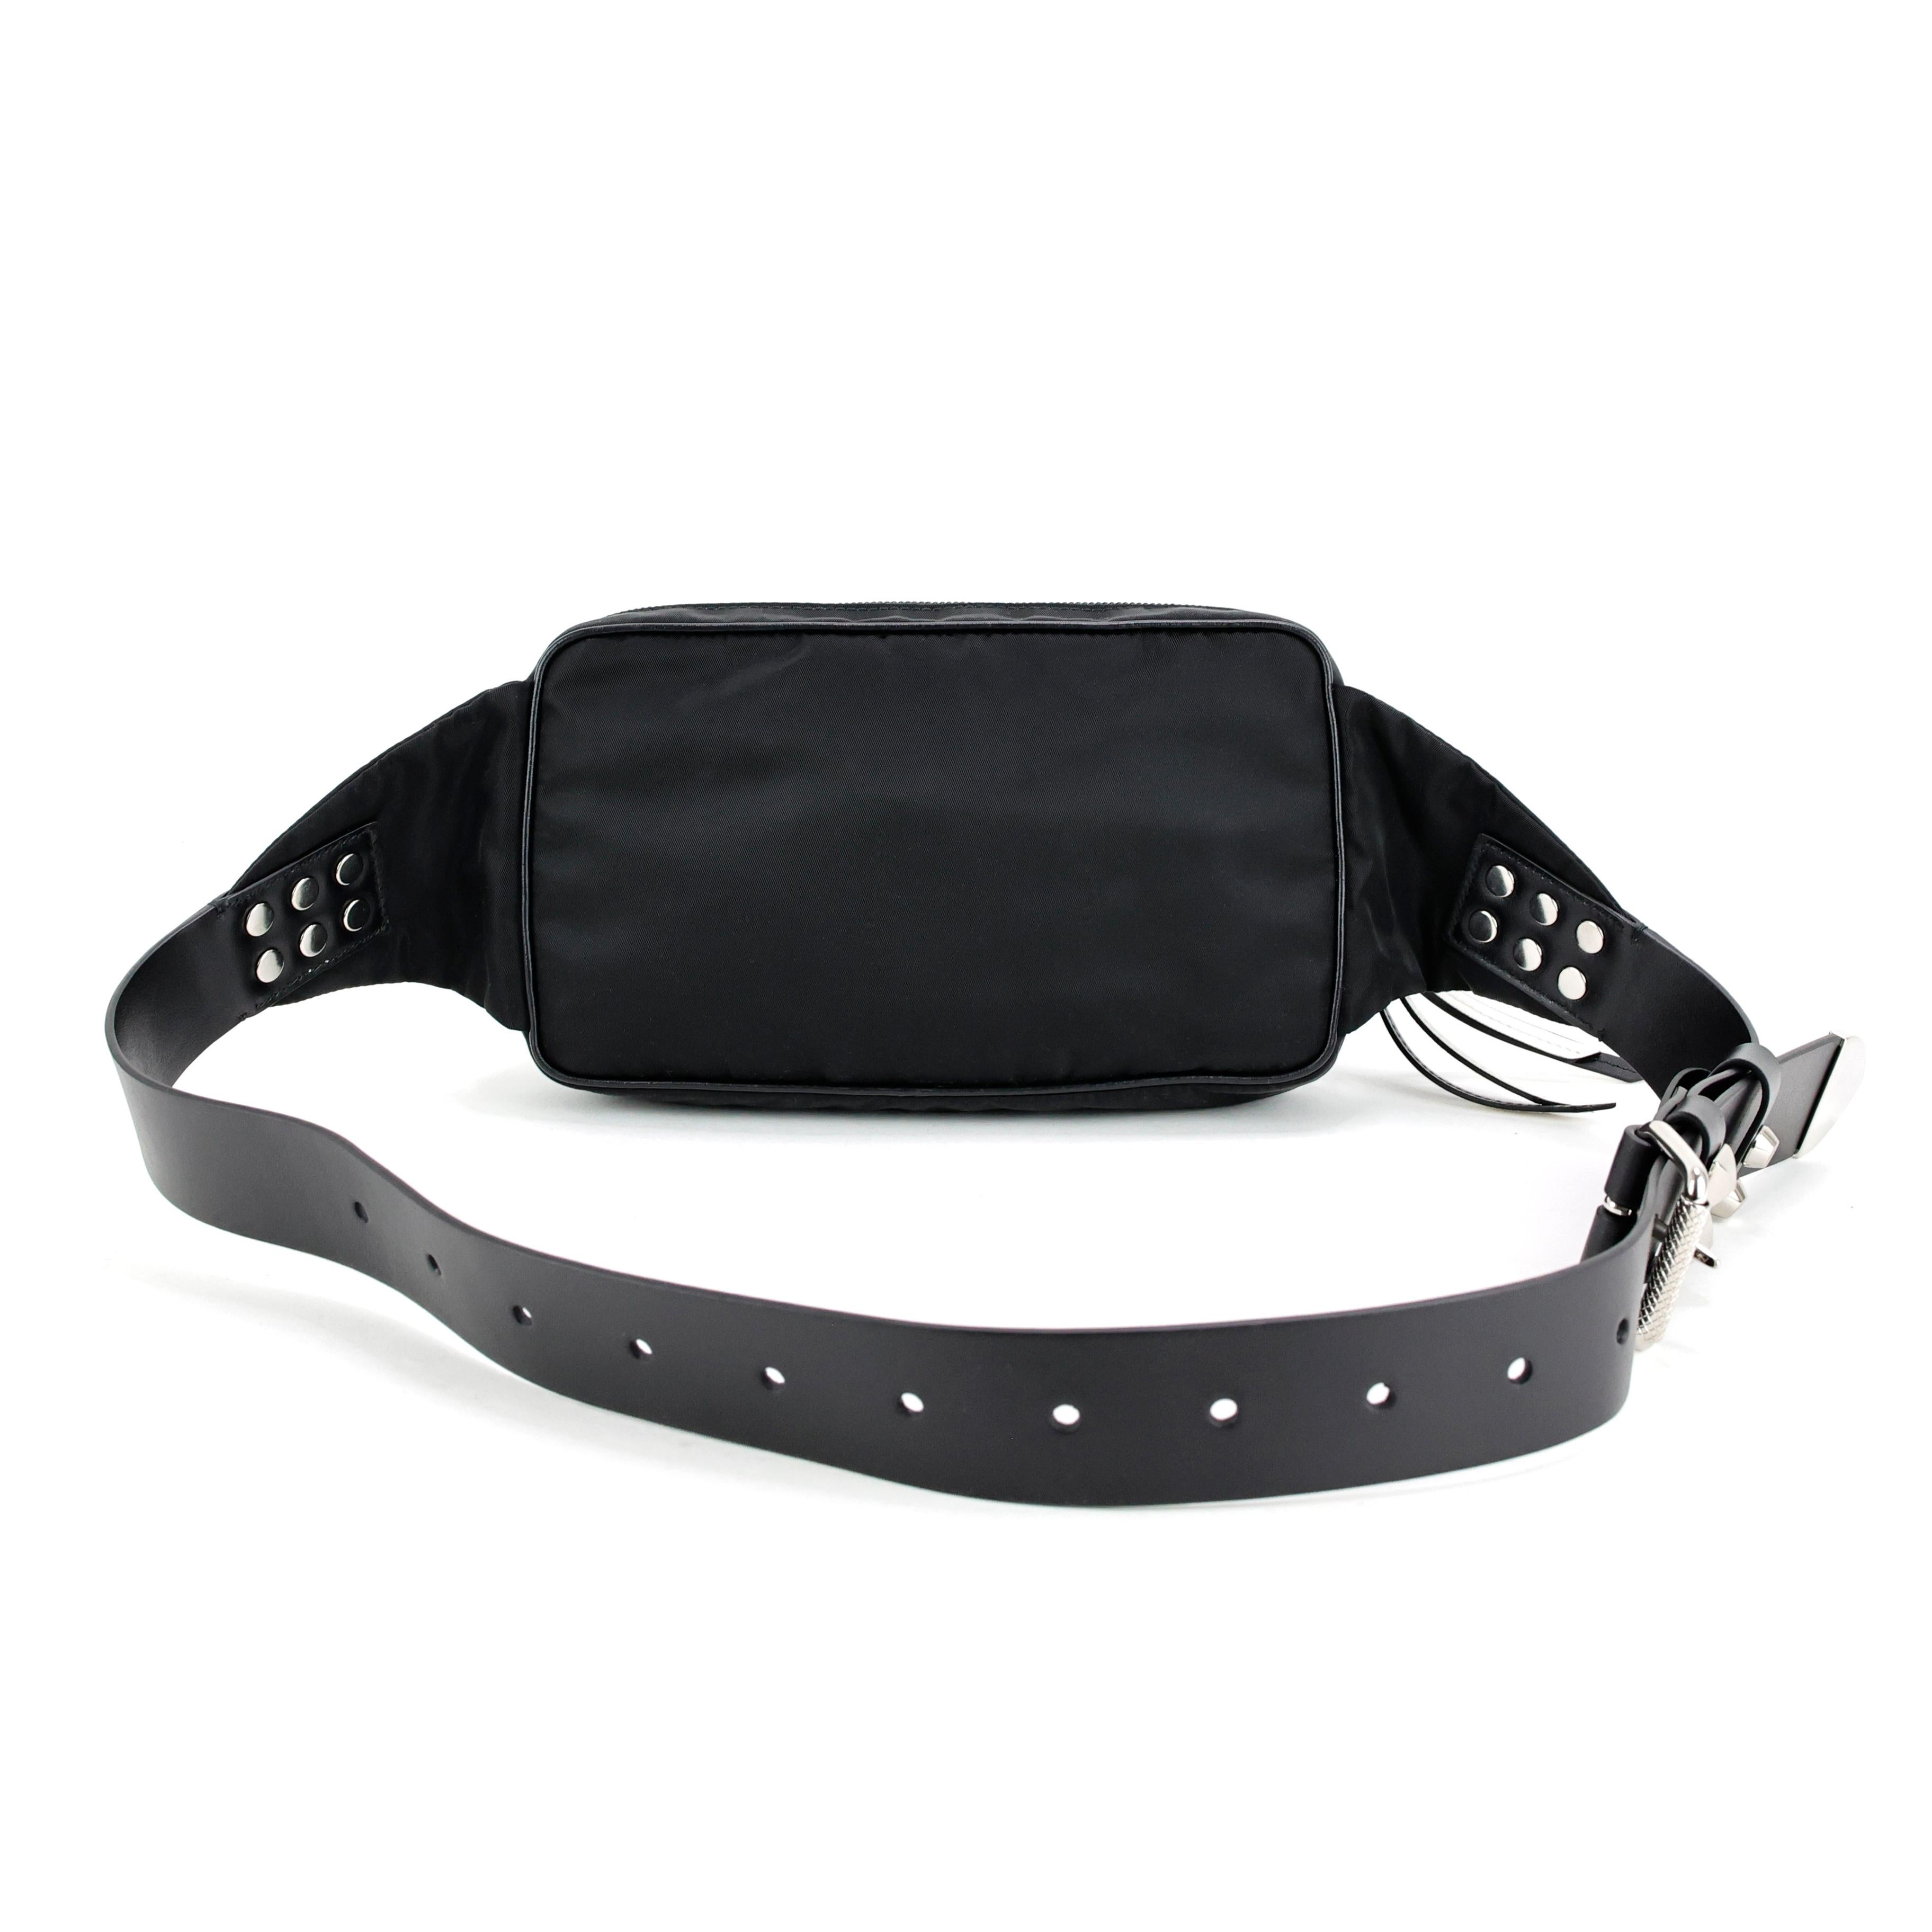 Prada beltbag in black nylon + leather, silver hardware. 

Condition: 
Excellent, like new.

Packing/accessories:
Box, dustbag and authenticity card.

Measurements: 
21cm x 12cm x 6cm